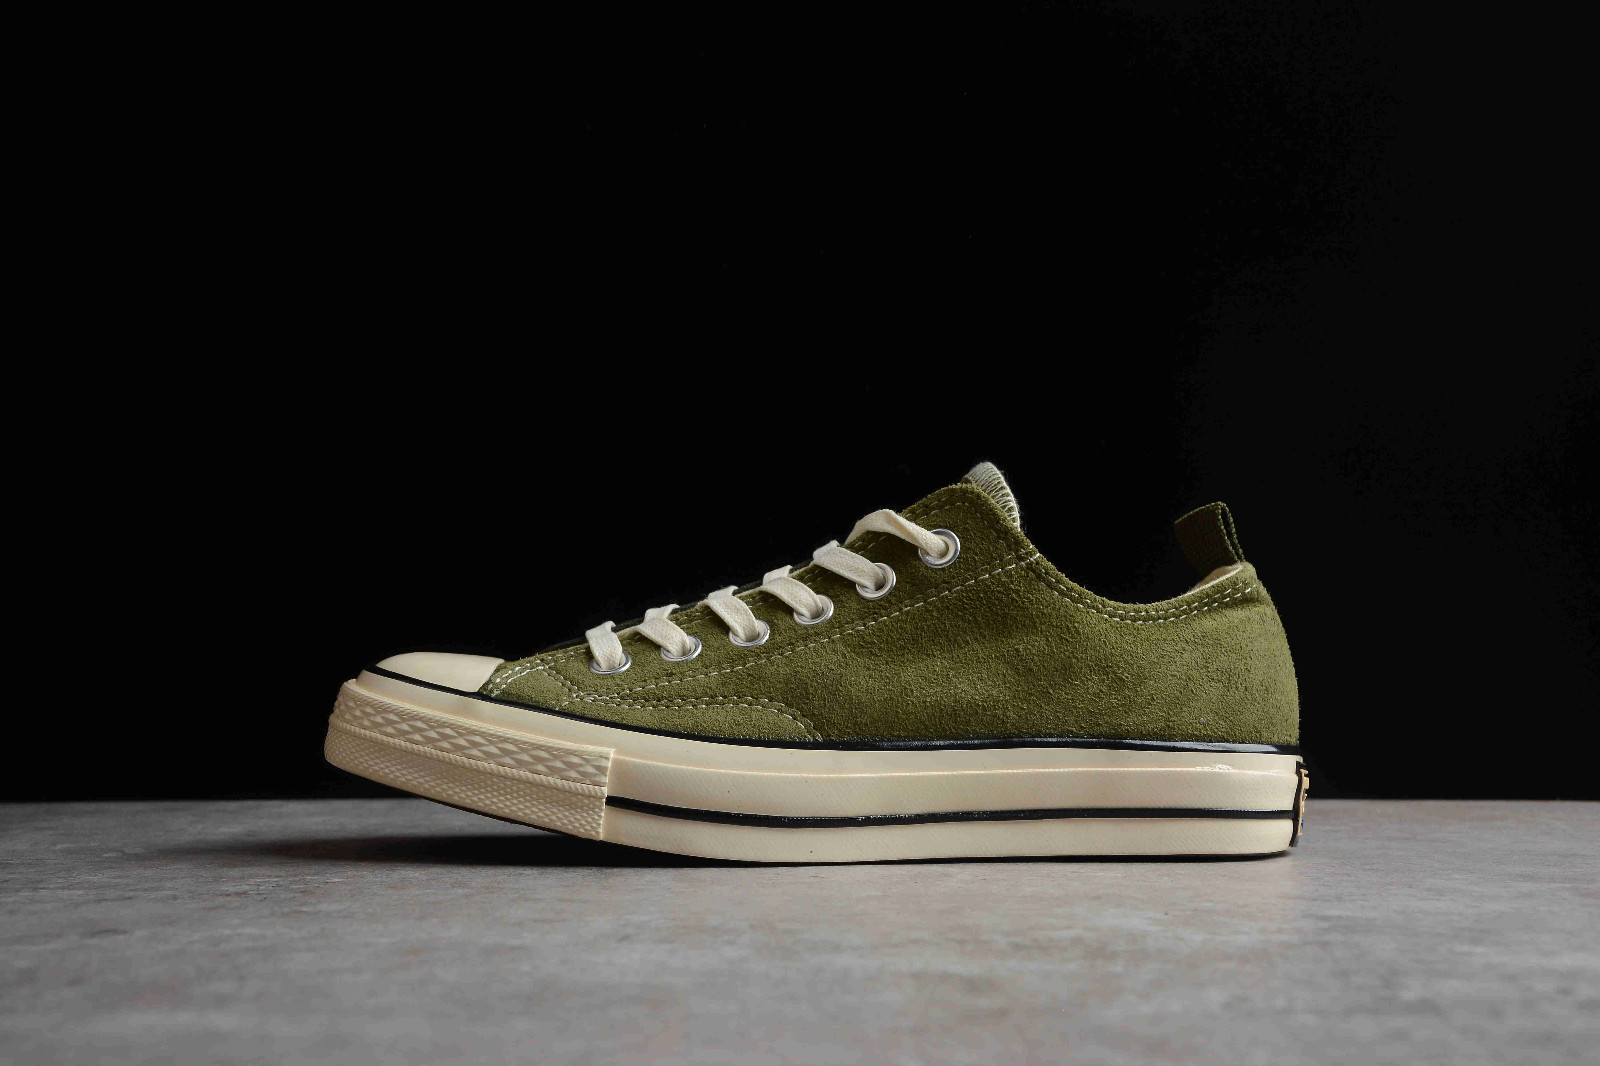 Converse Ctas Piquant Green Black - GmarShops - Madness x Converse Chuck Taylor Star 70 Ox Army Green Suede 161026C